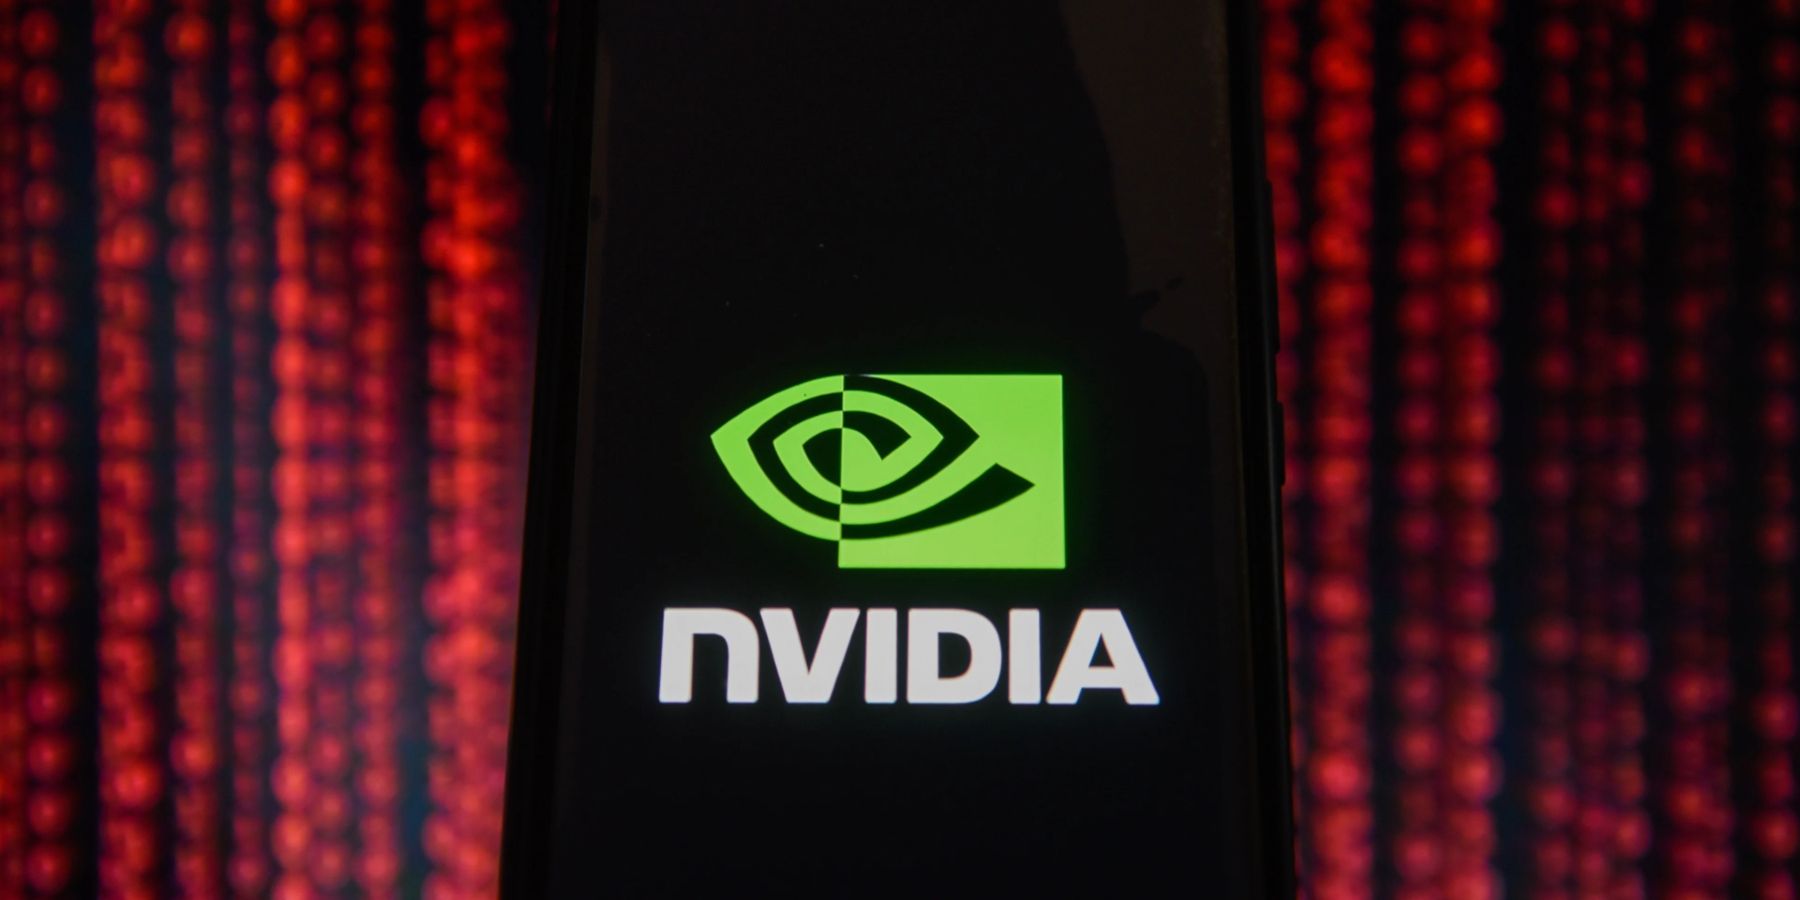 The Nvidia logo on a black and flashy red background.